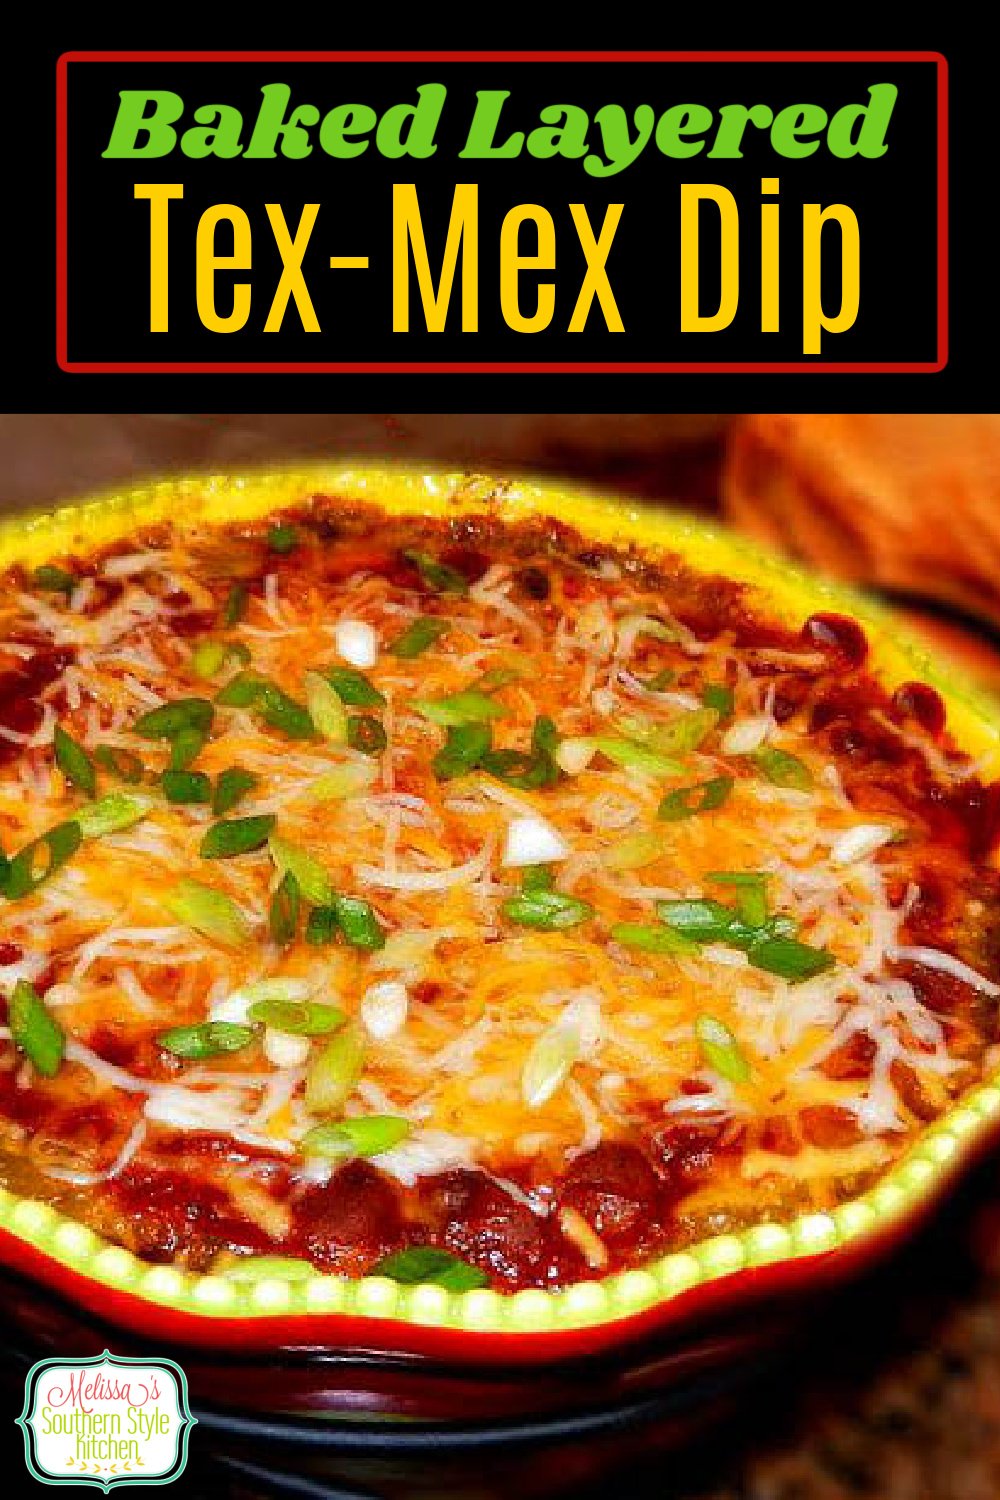 Grab some tortilla chips and start dipping this delicious warm and gooey Baked Layered Tex Mex Dip #bakedtexmexdip #mexicandip #layeredmexicandip #texmex #chili #diprecipes #appetizers #mexicanfood #football #gamedayrecipes #southernfood #southernrecipes via @melissasssk